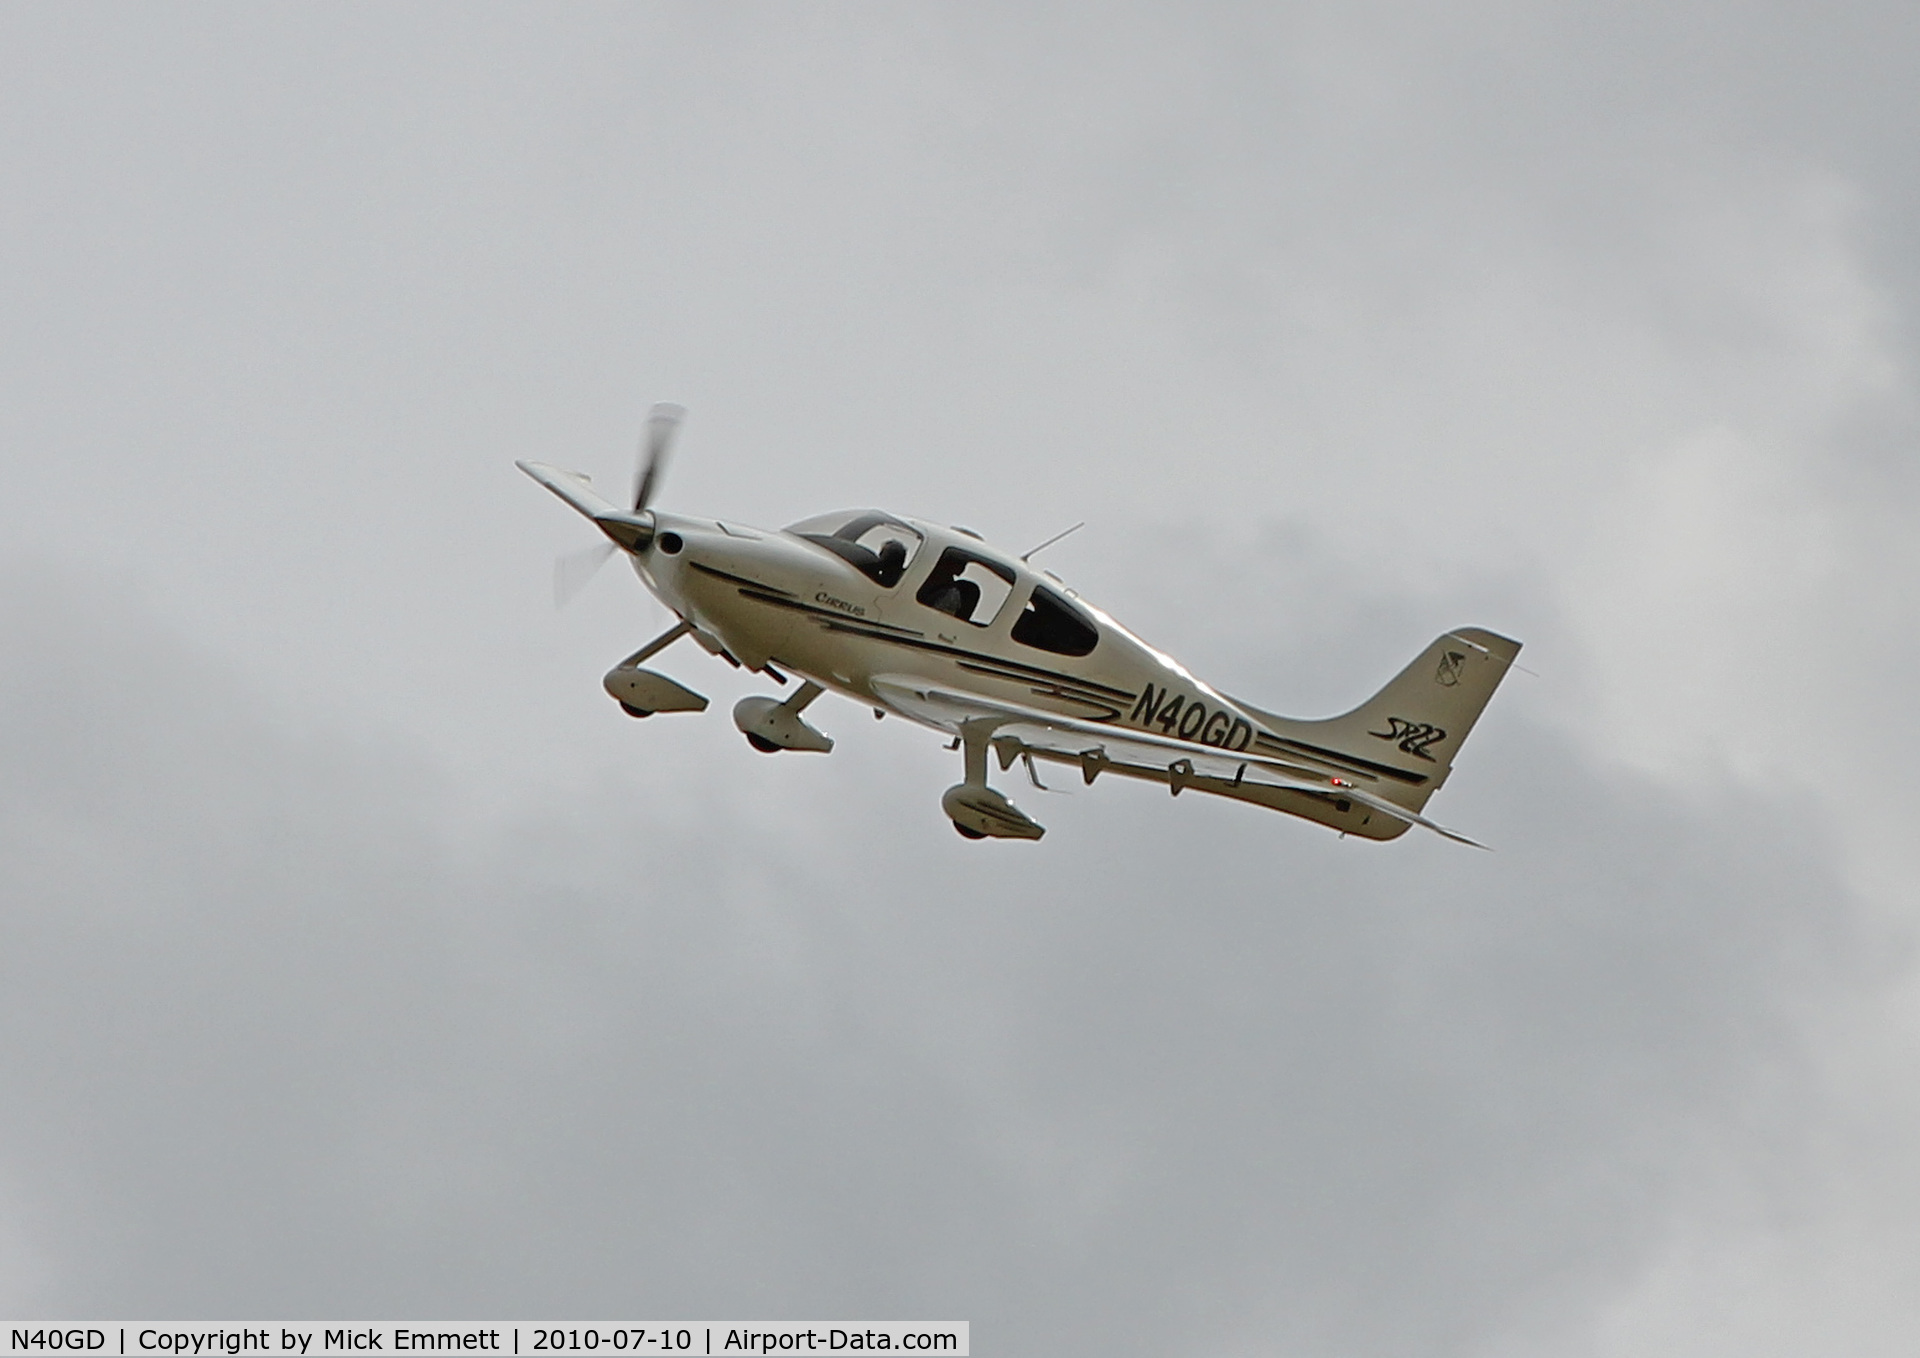 N40GD, 2003 Cirrus SR22 C/N 0473, Flying way too fast and way too low over Sherburn Bikers Cafe', Yorkshire, England.